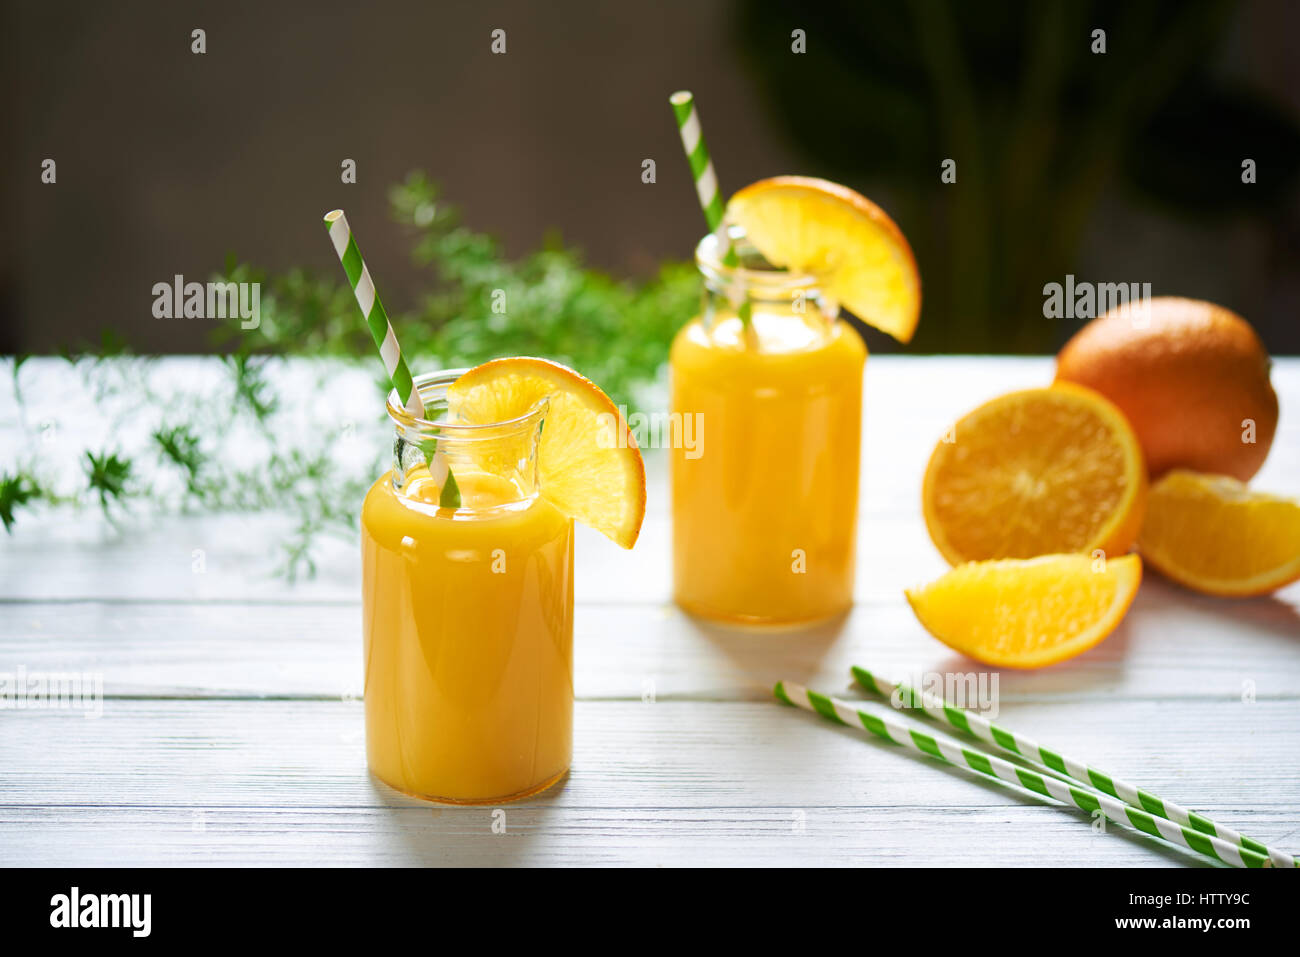 https://c8.alamy.com/comp/HTTY9C/fresh-orange-juice-in-the-jar-with-straw-on-white-wood-table-vertical-HTTY9C.jpg